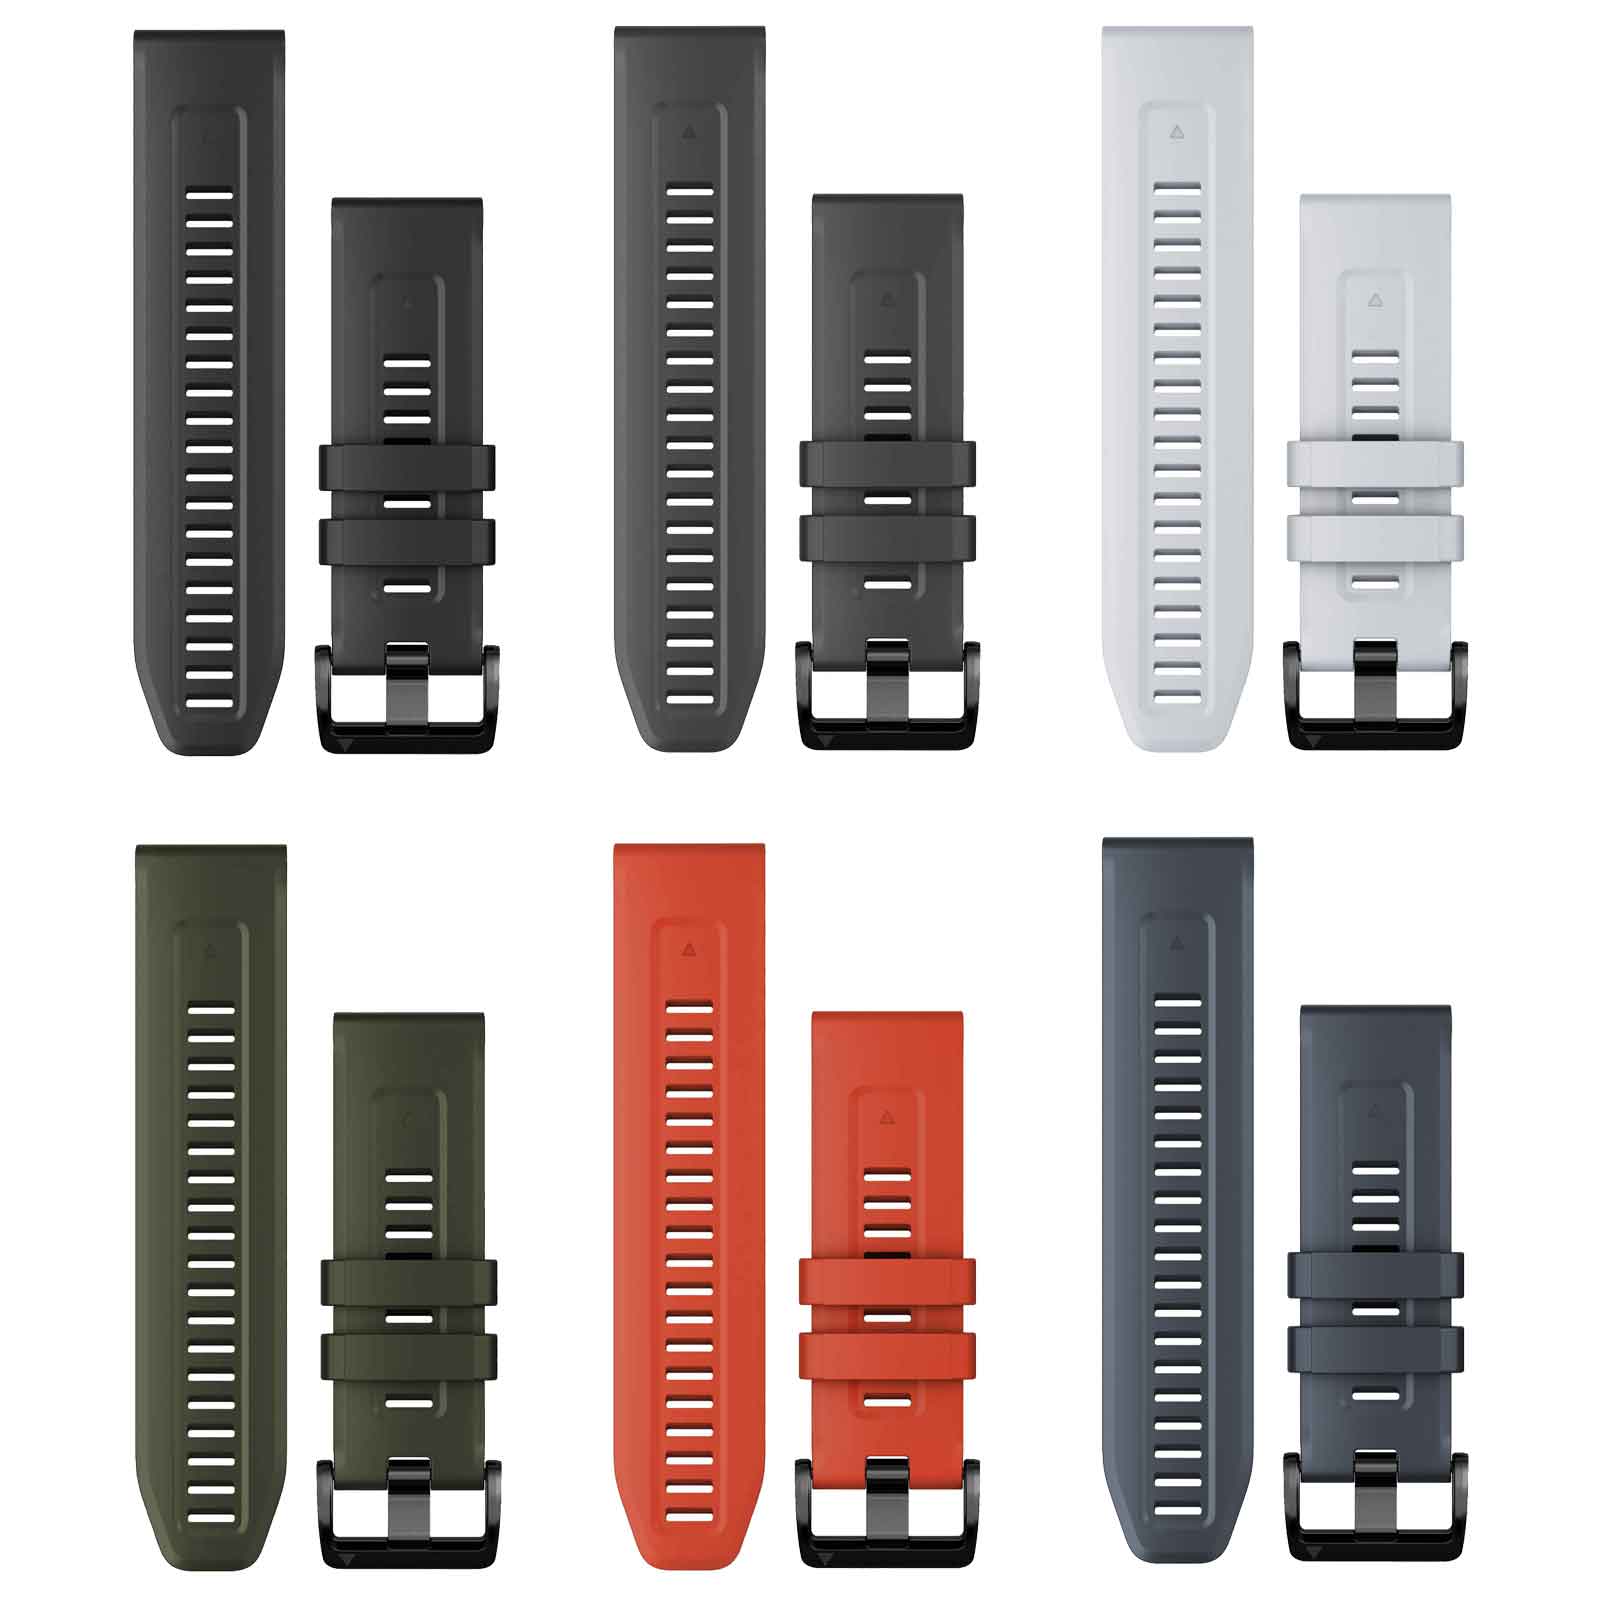 Picture of Garmin QuickFit 26 Watch Bands for Fenix 3/5X/6X/7X, Enduro - Silicone